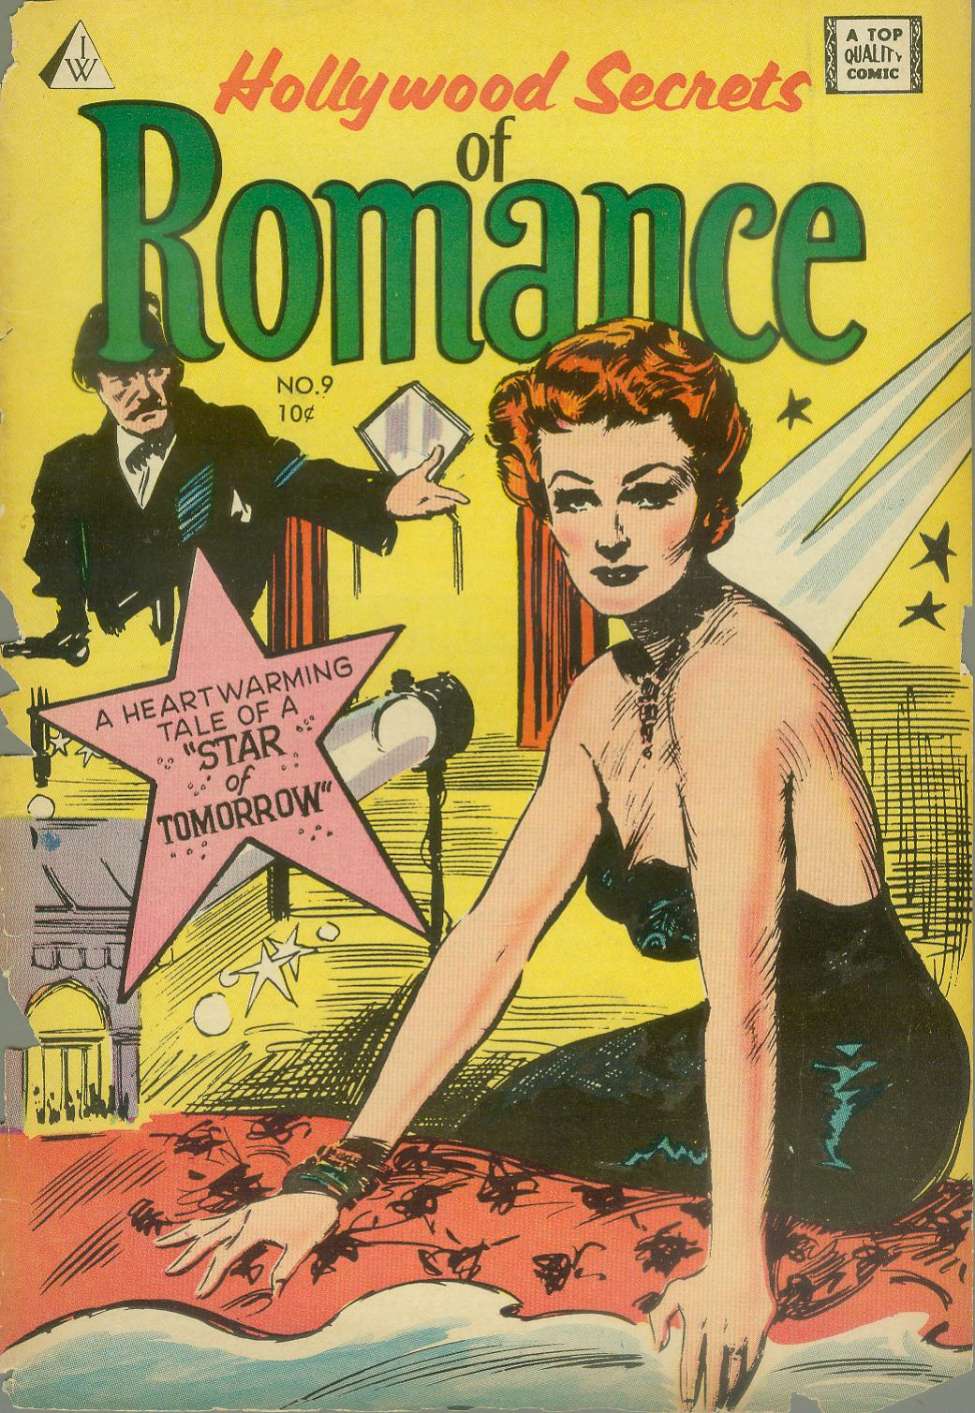 Book Cover For Hollywood Secrets of Romance 9